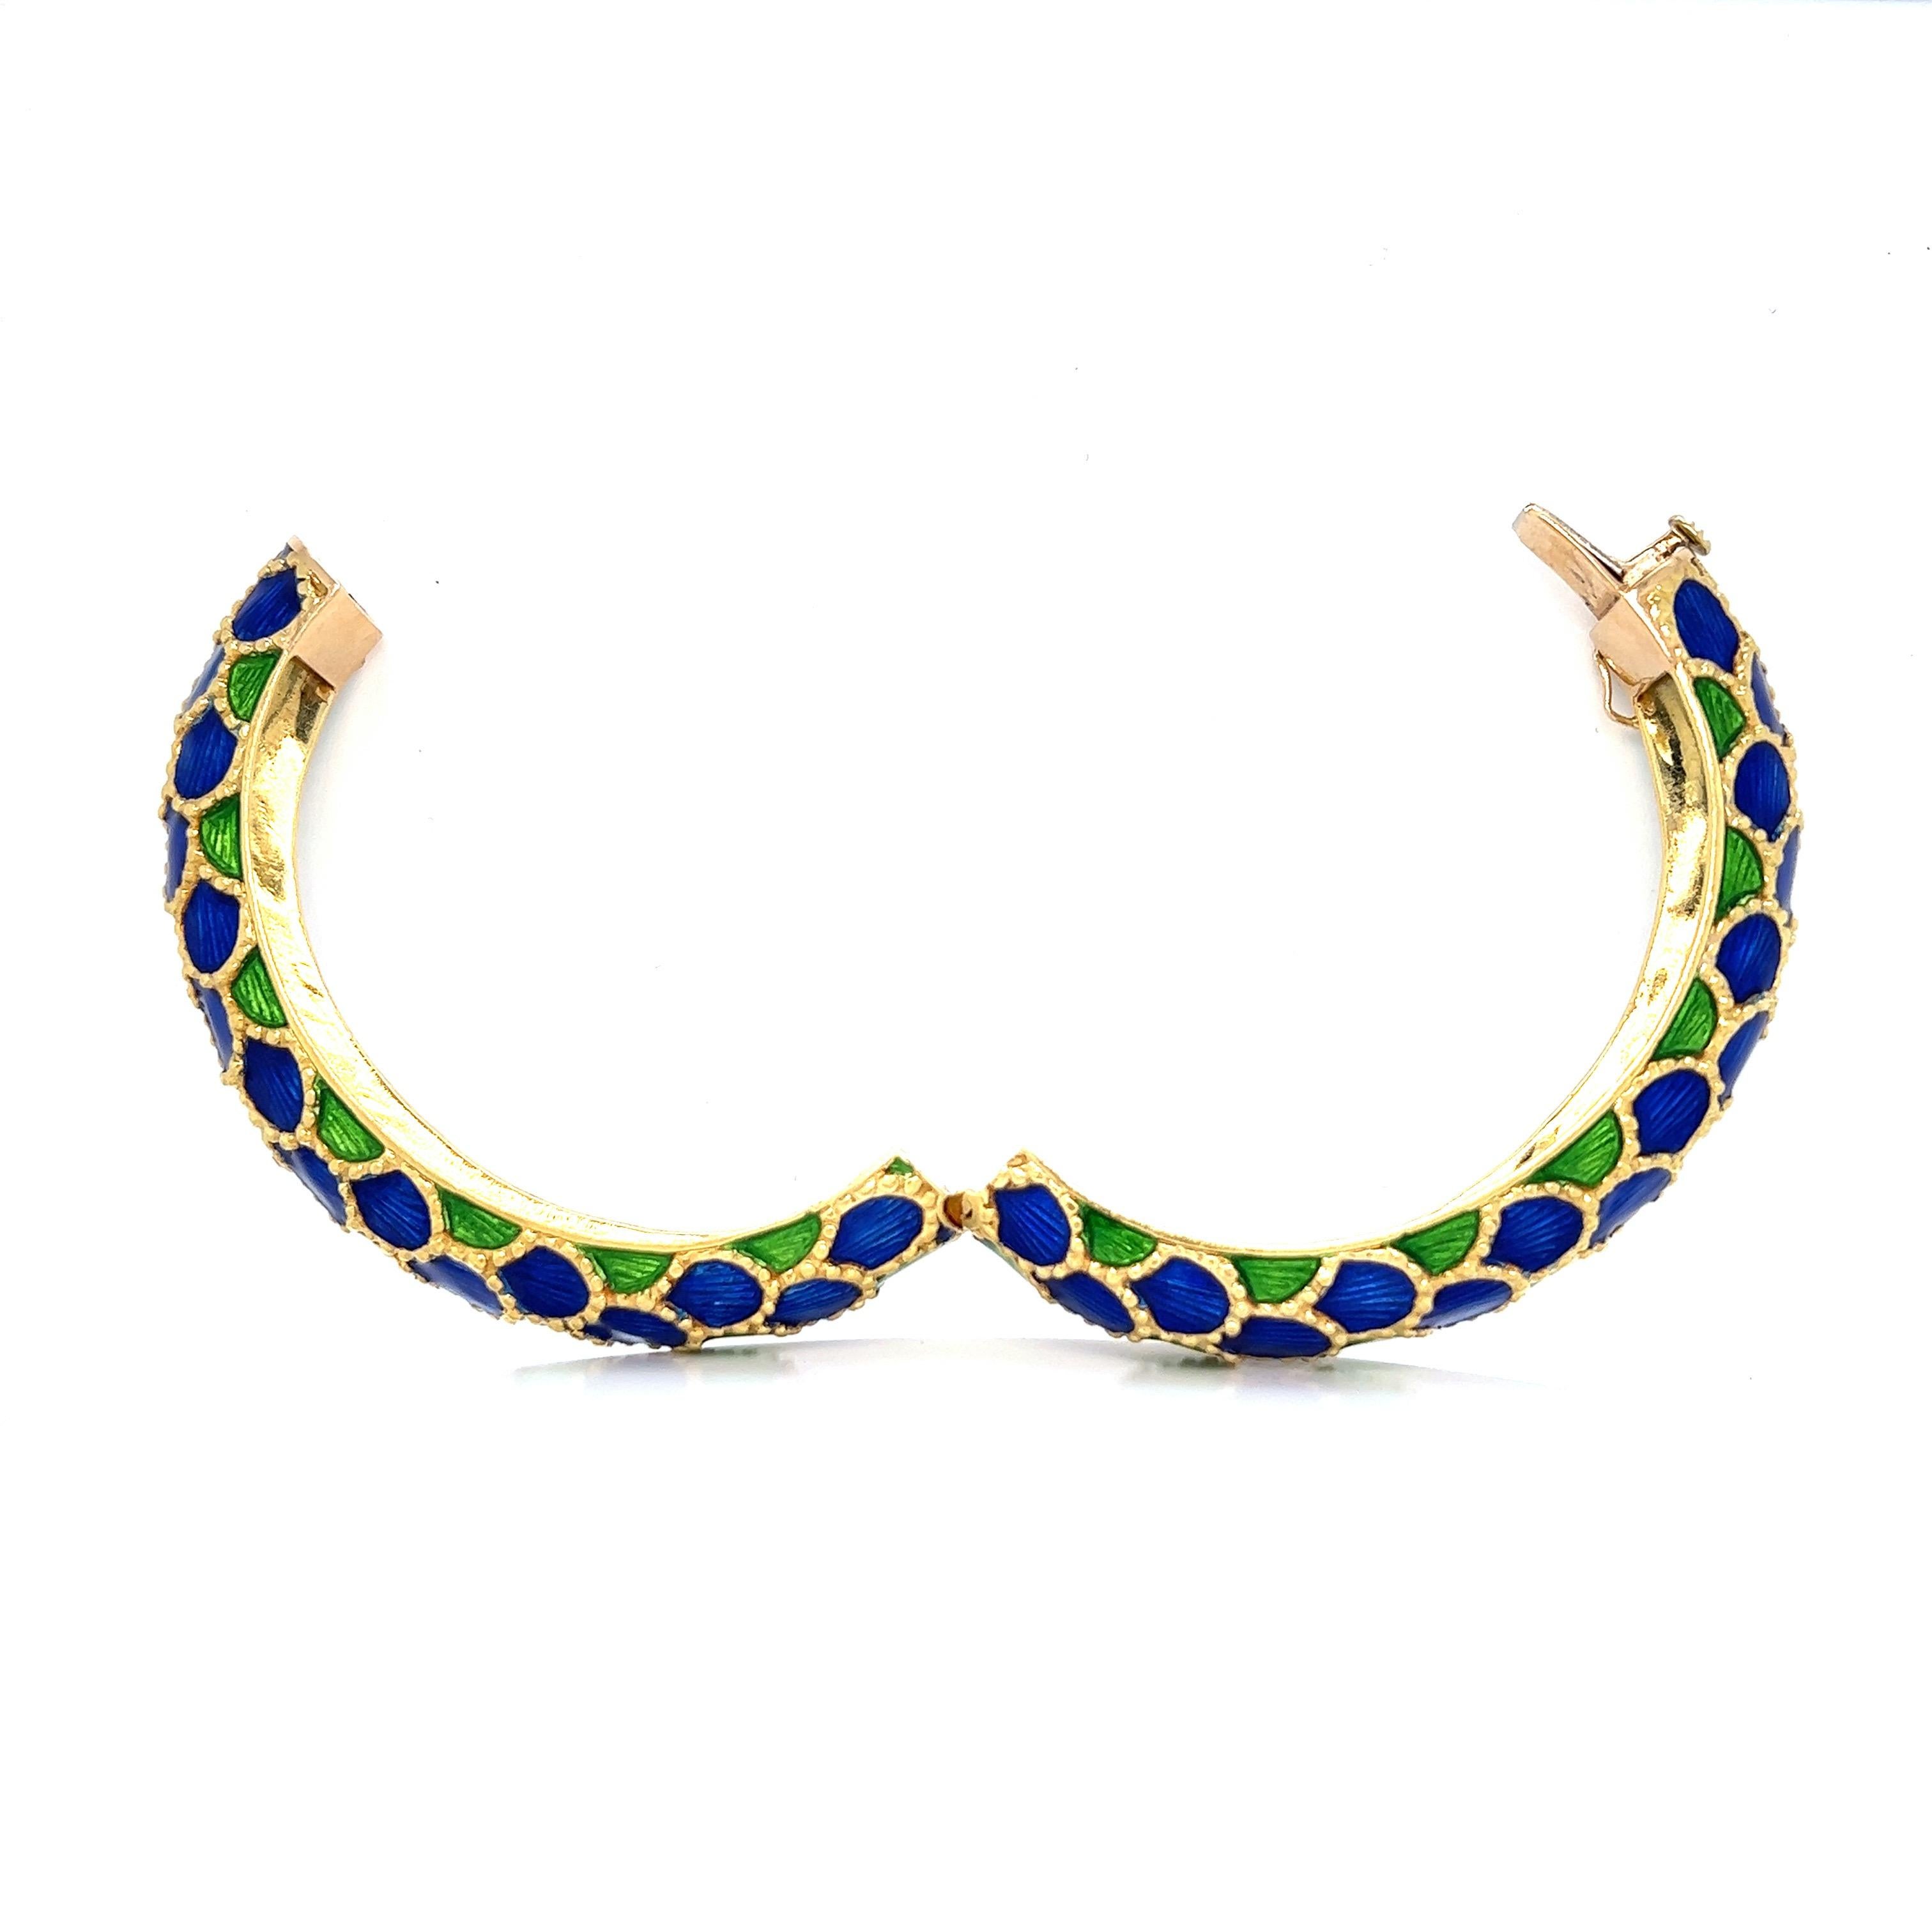 Tiffany & Co. Blue & Green Enamel Gold Bangle Bracelet In Excellent Condition For Sale In New York, NY